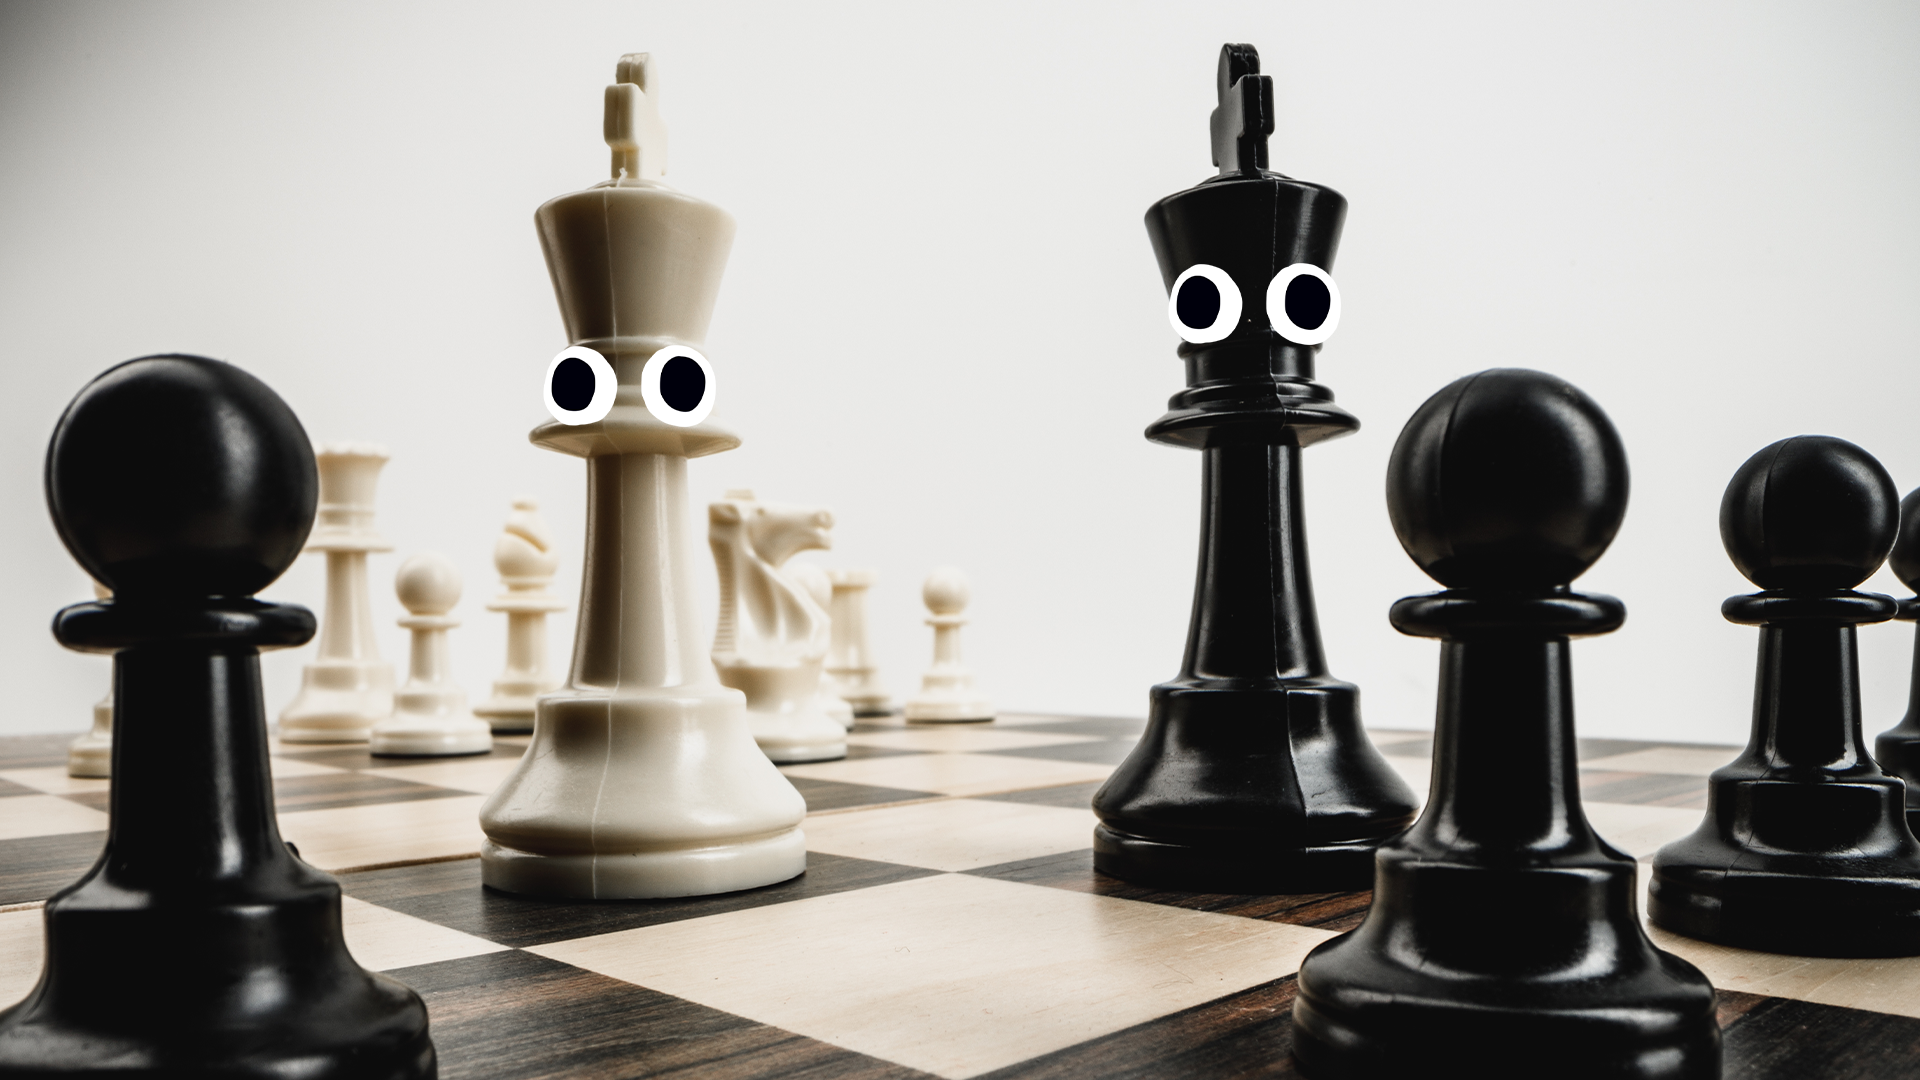 Chess pieces with eyes